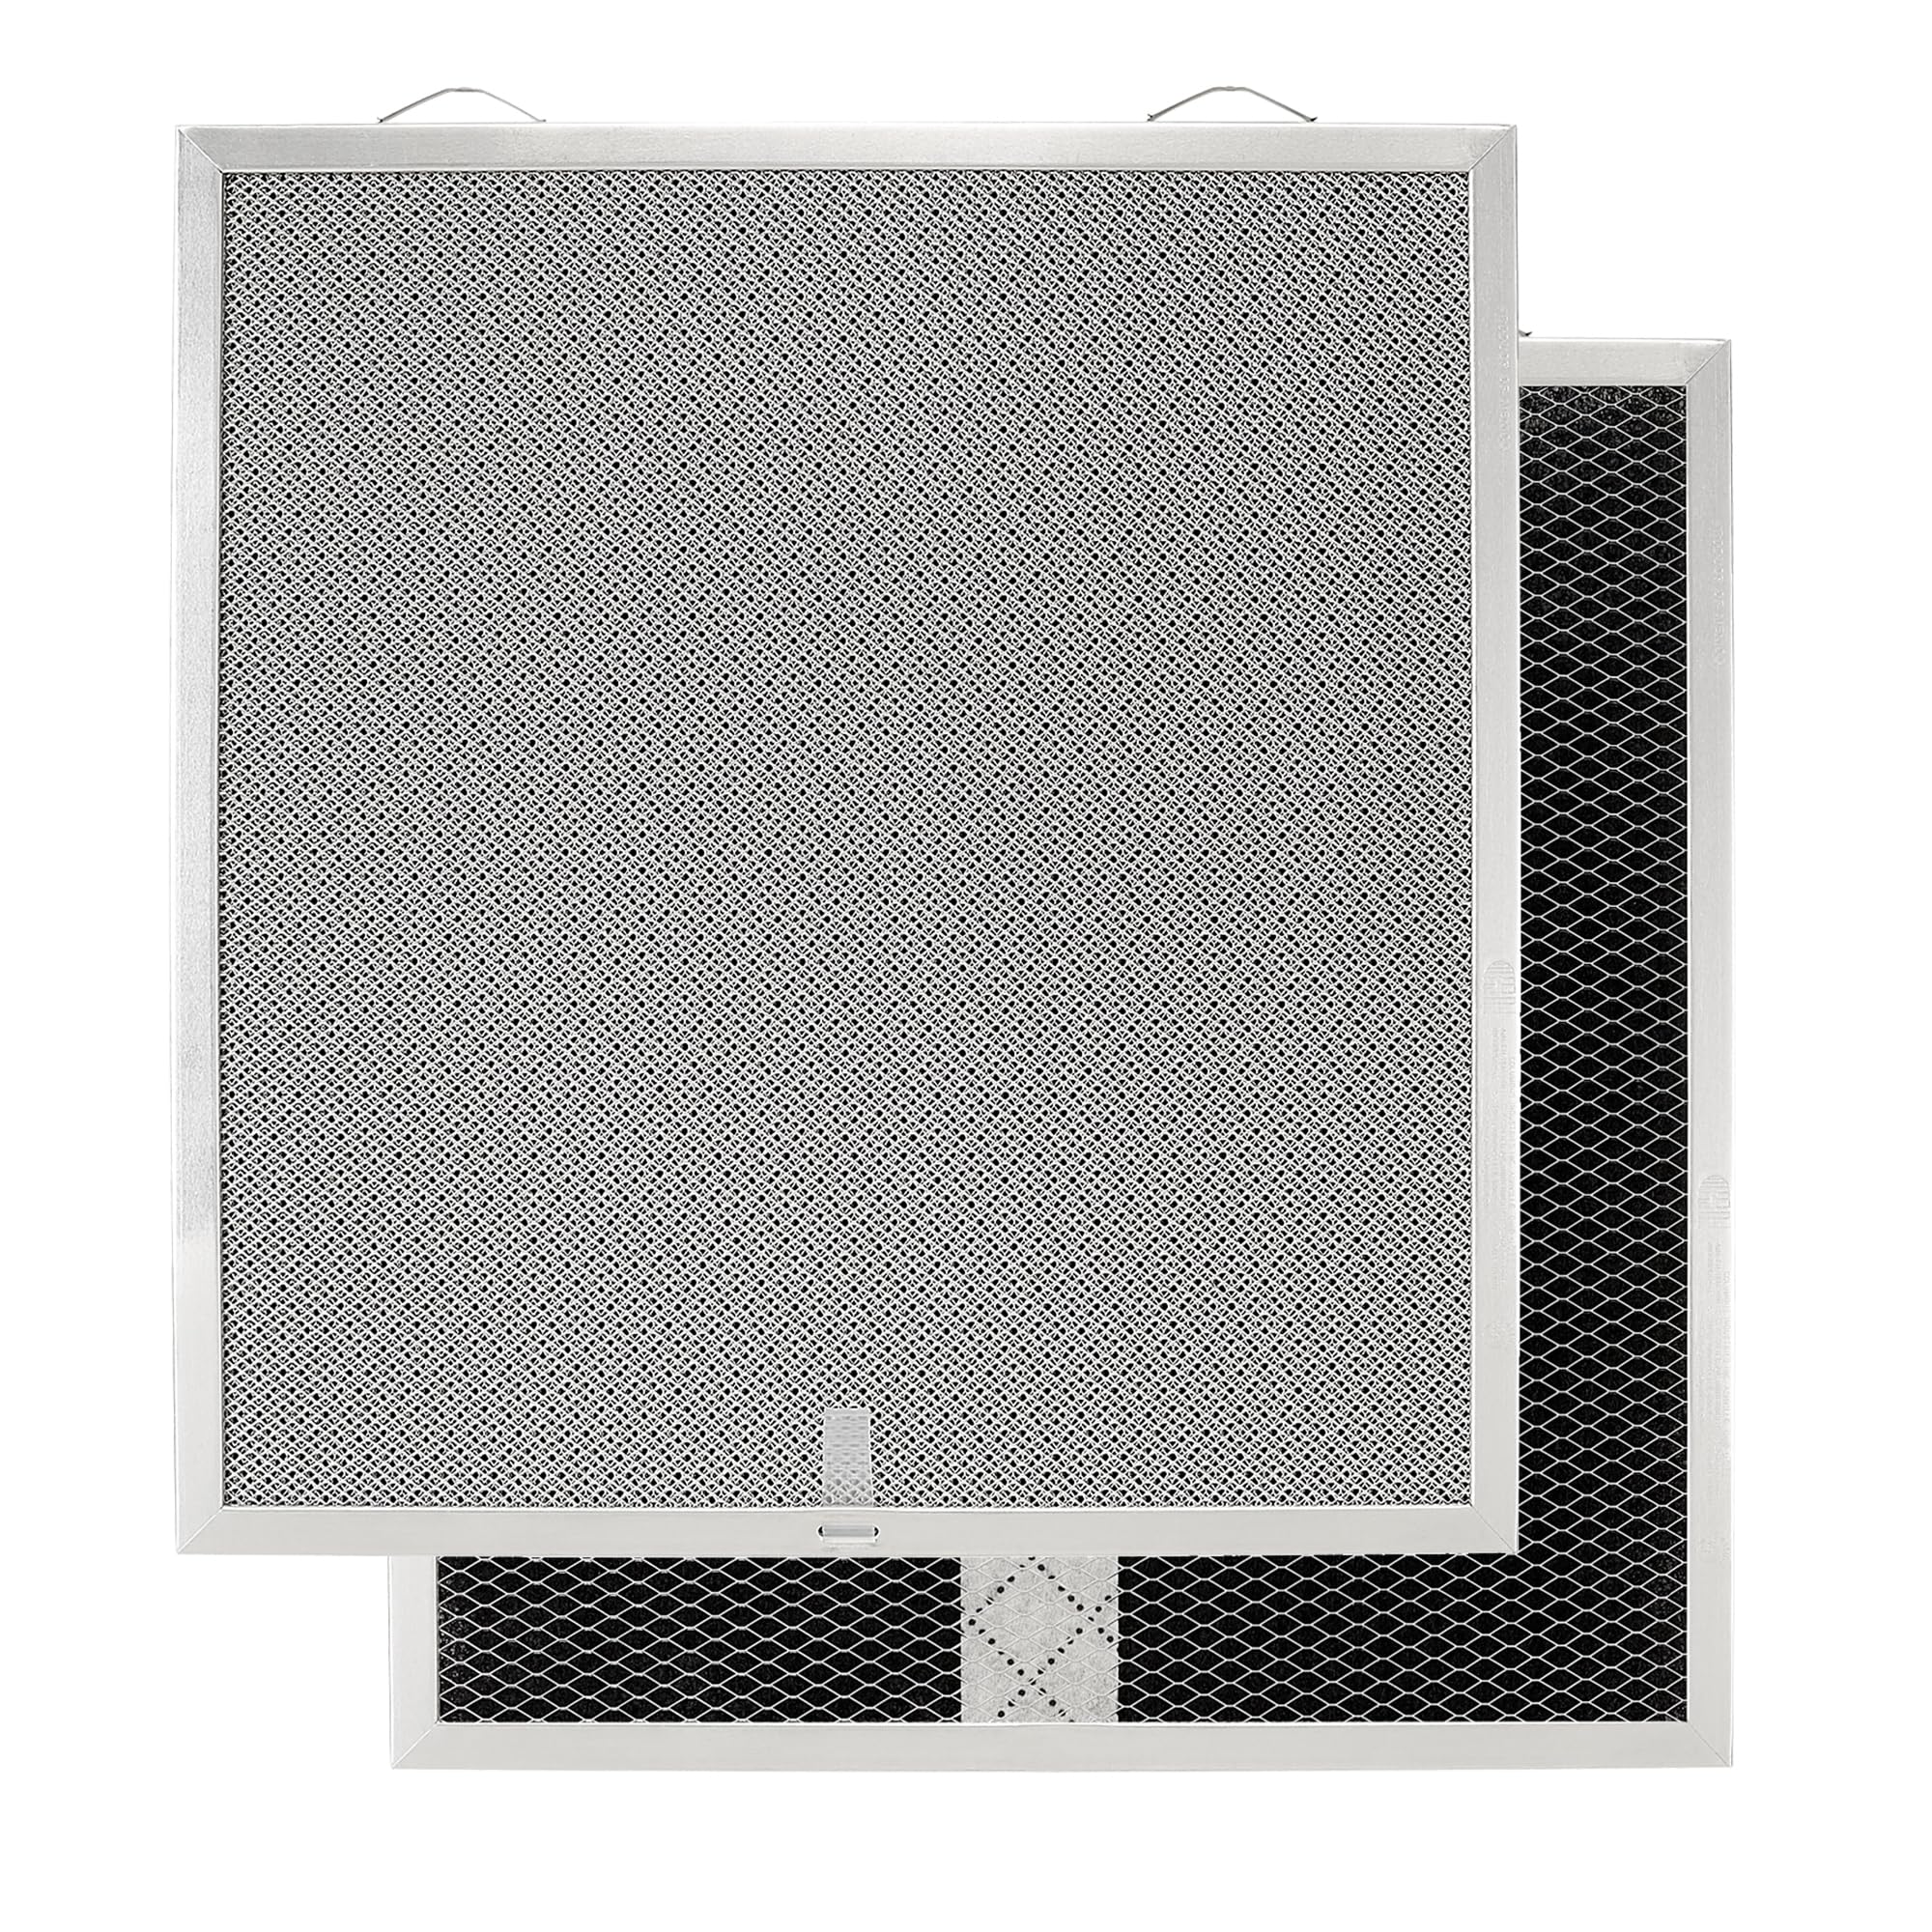 Broan-NuTone Replacement Charcoal Filter (XA) for Ductless Range Hood Single Filter Models